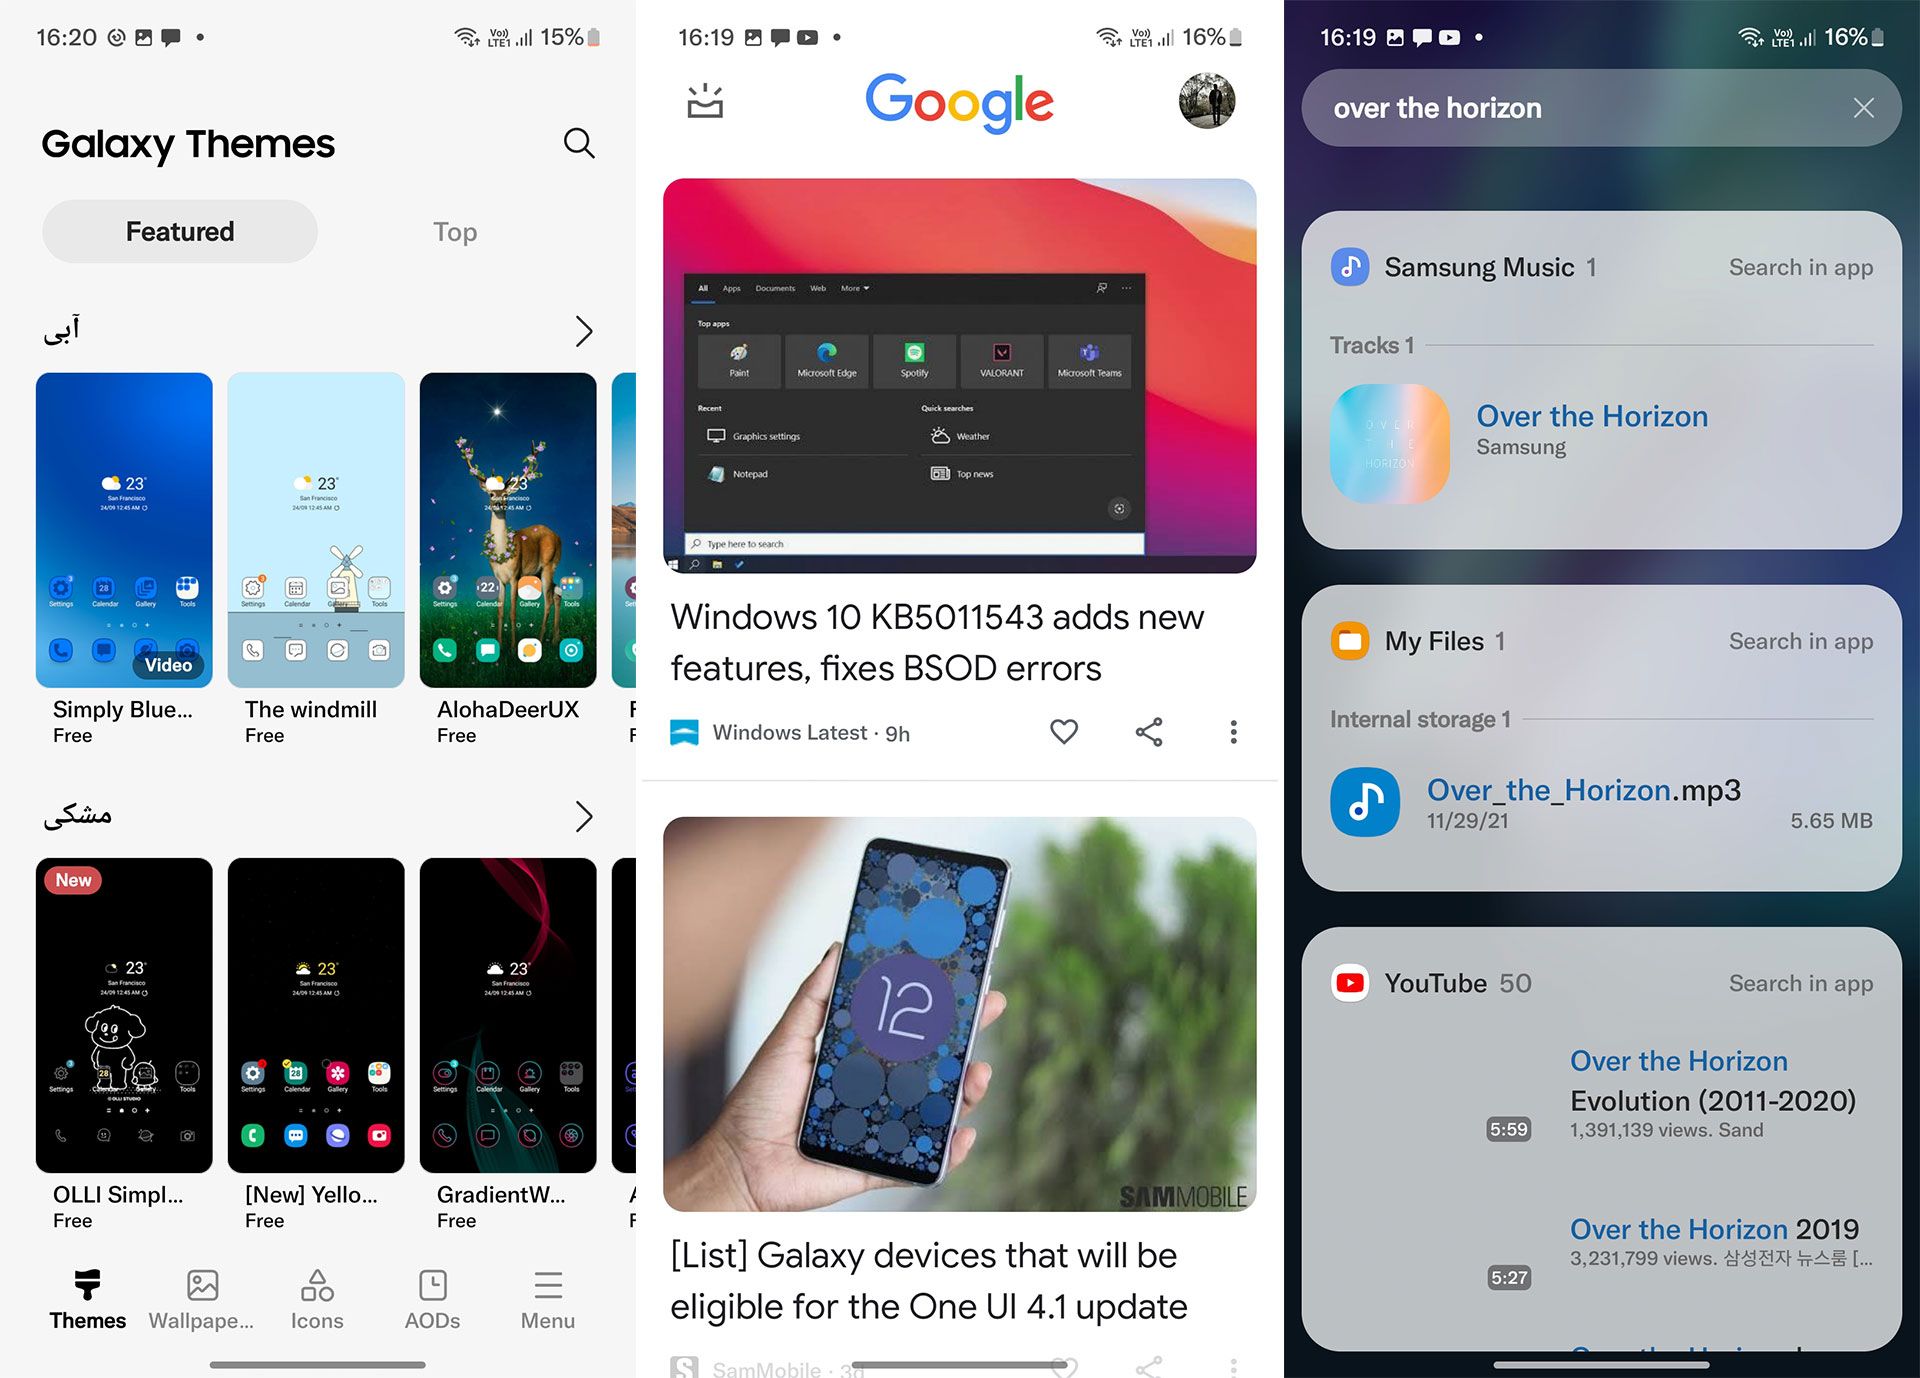 One UI Launcher Features